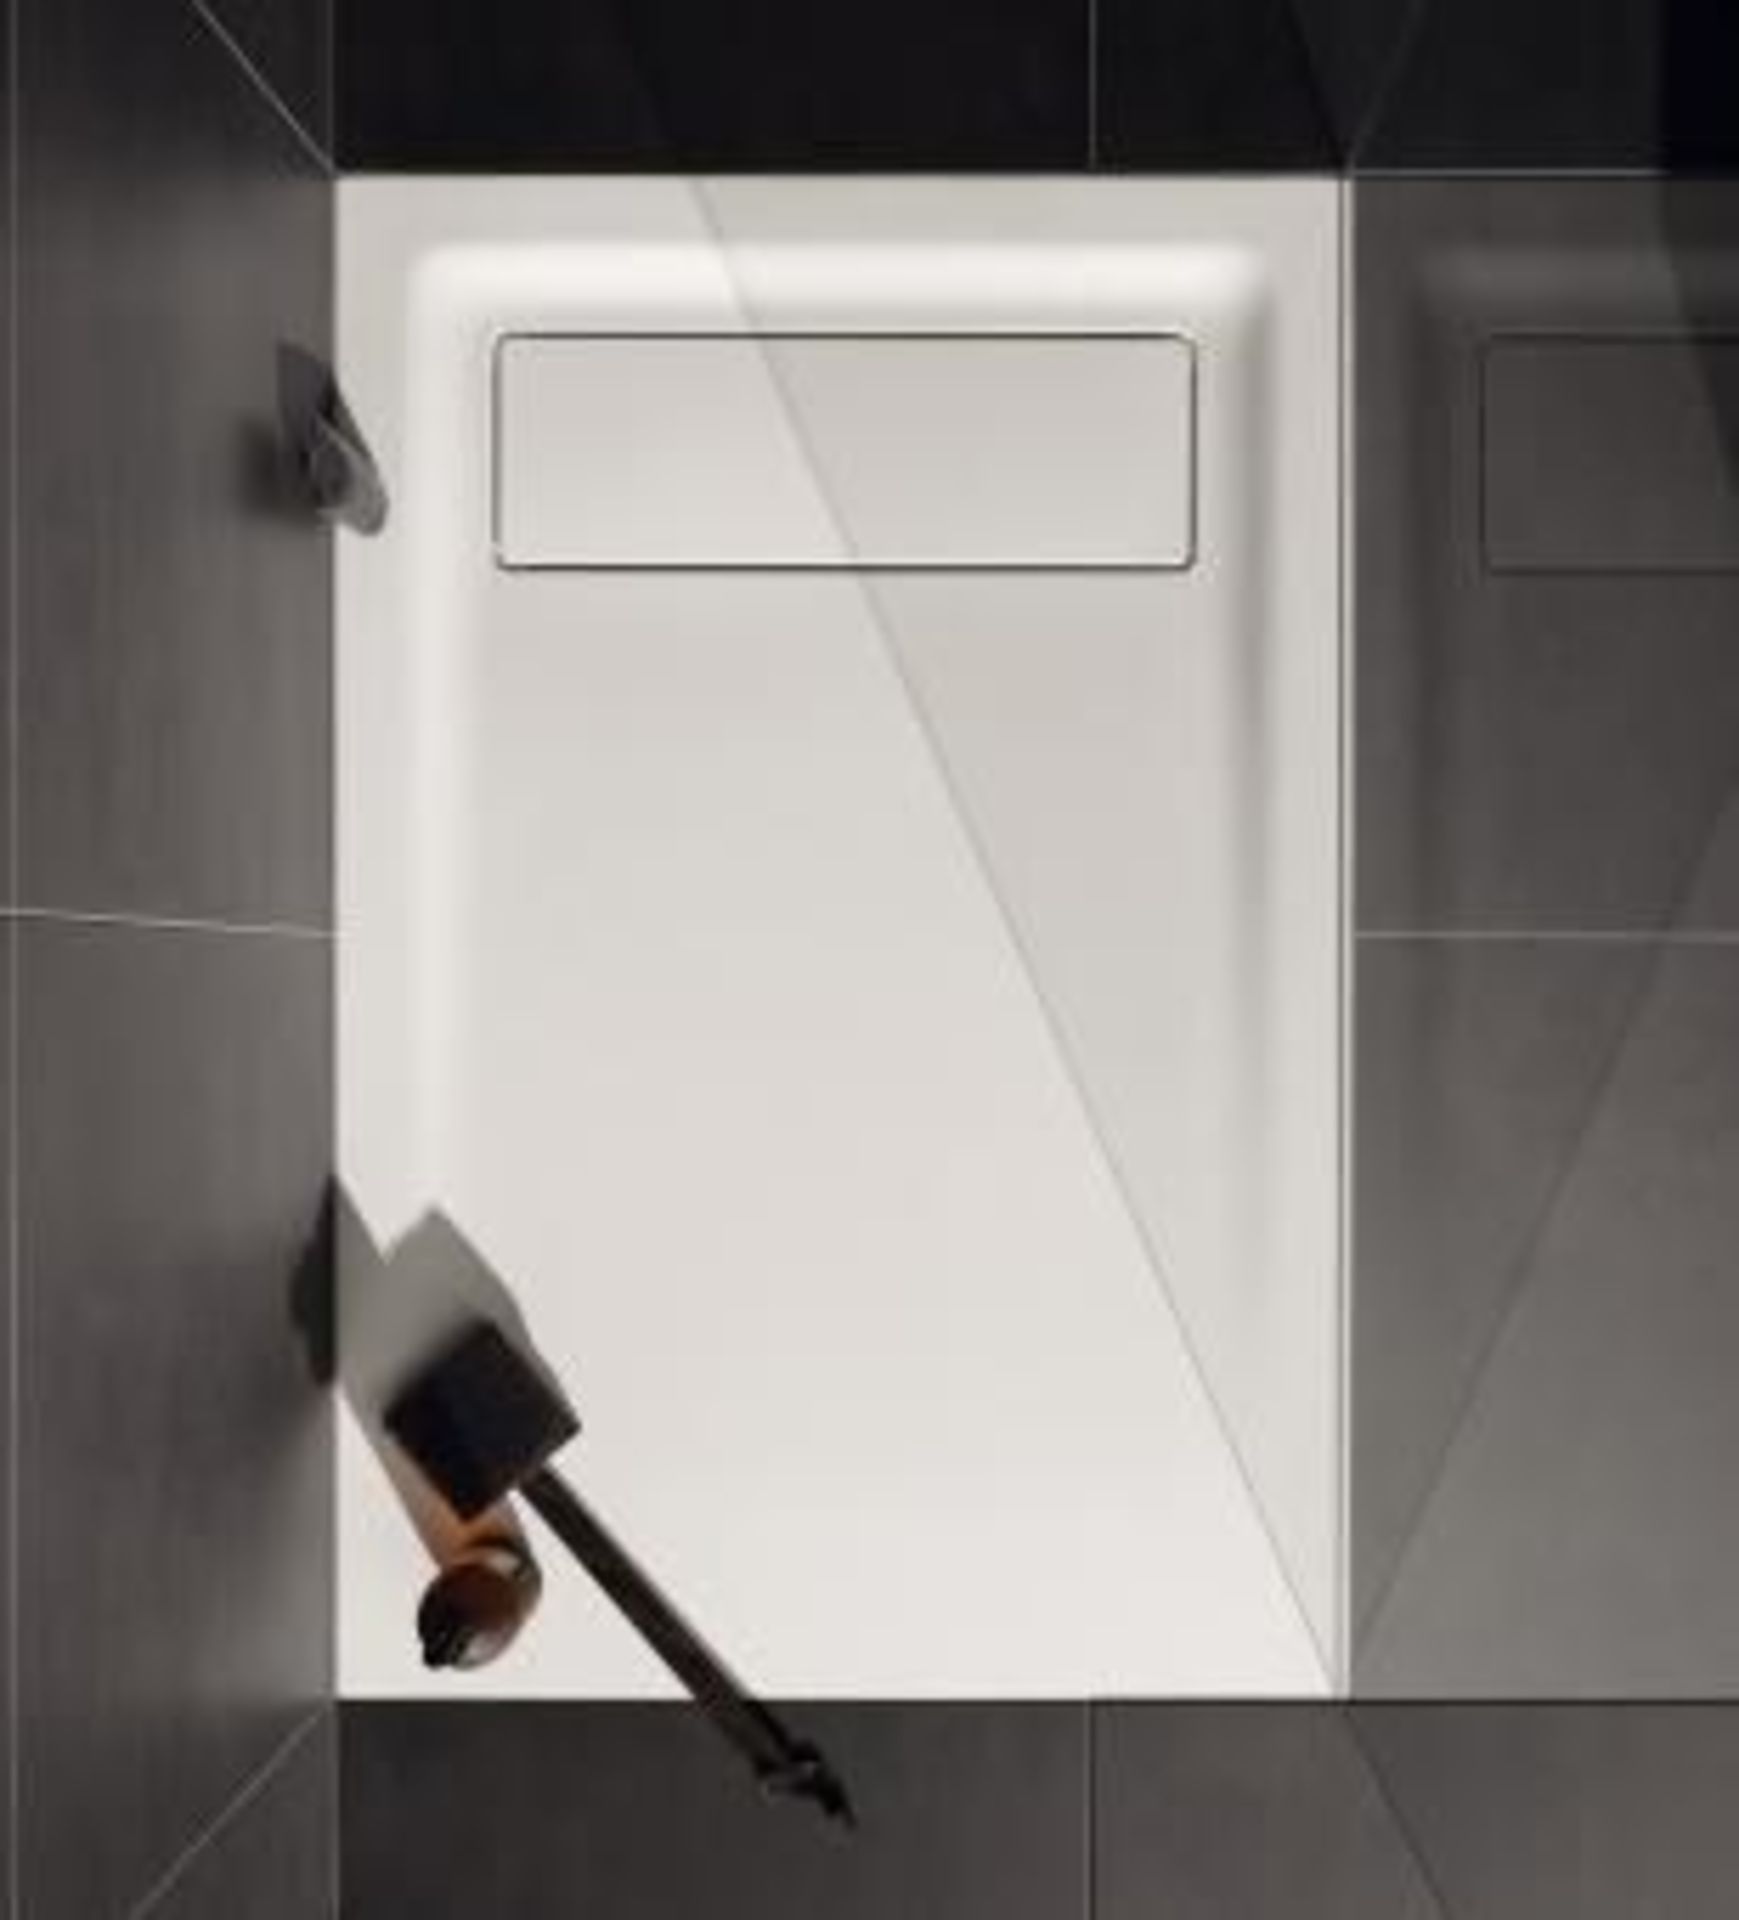 (LV102) Keramag 1200x900mm Opale White Shower Tray. RRP £1,479.99.Opale is sober, slender and ... - Image 3 of 3